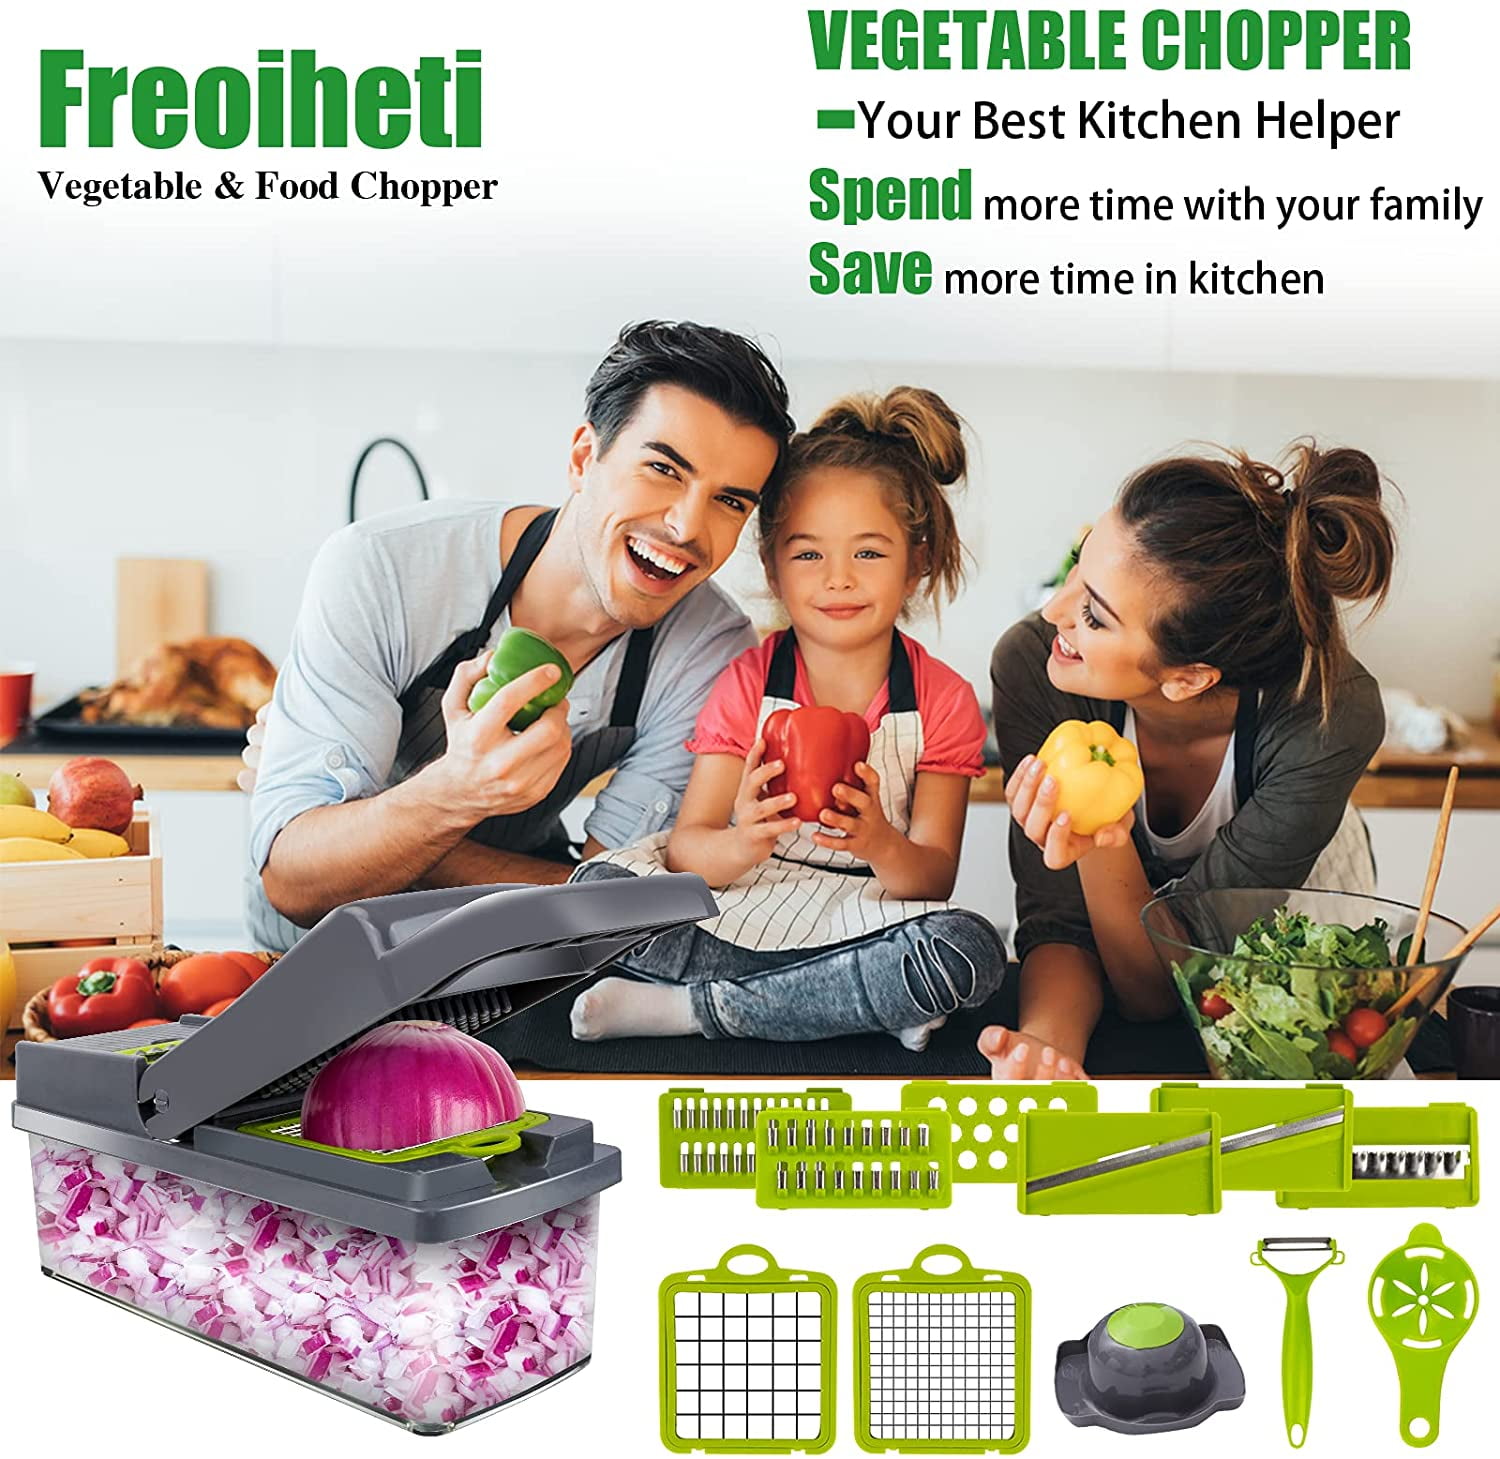 Best Vegetable Choppers for Saving Time